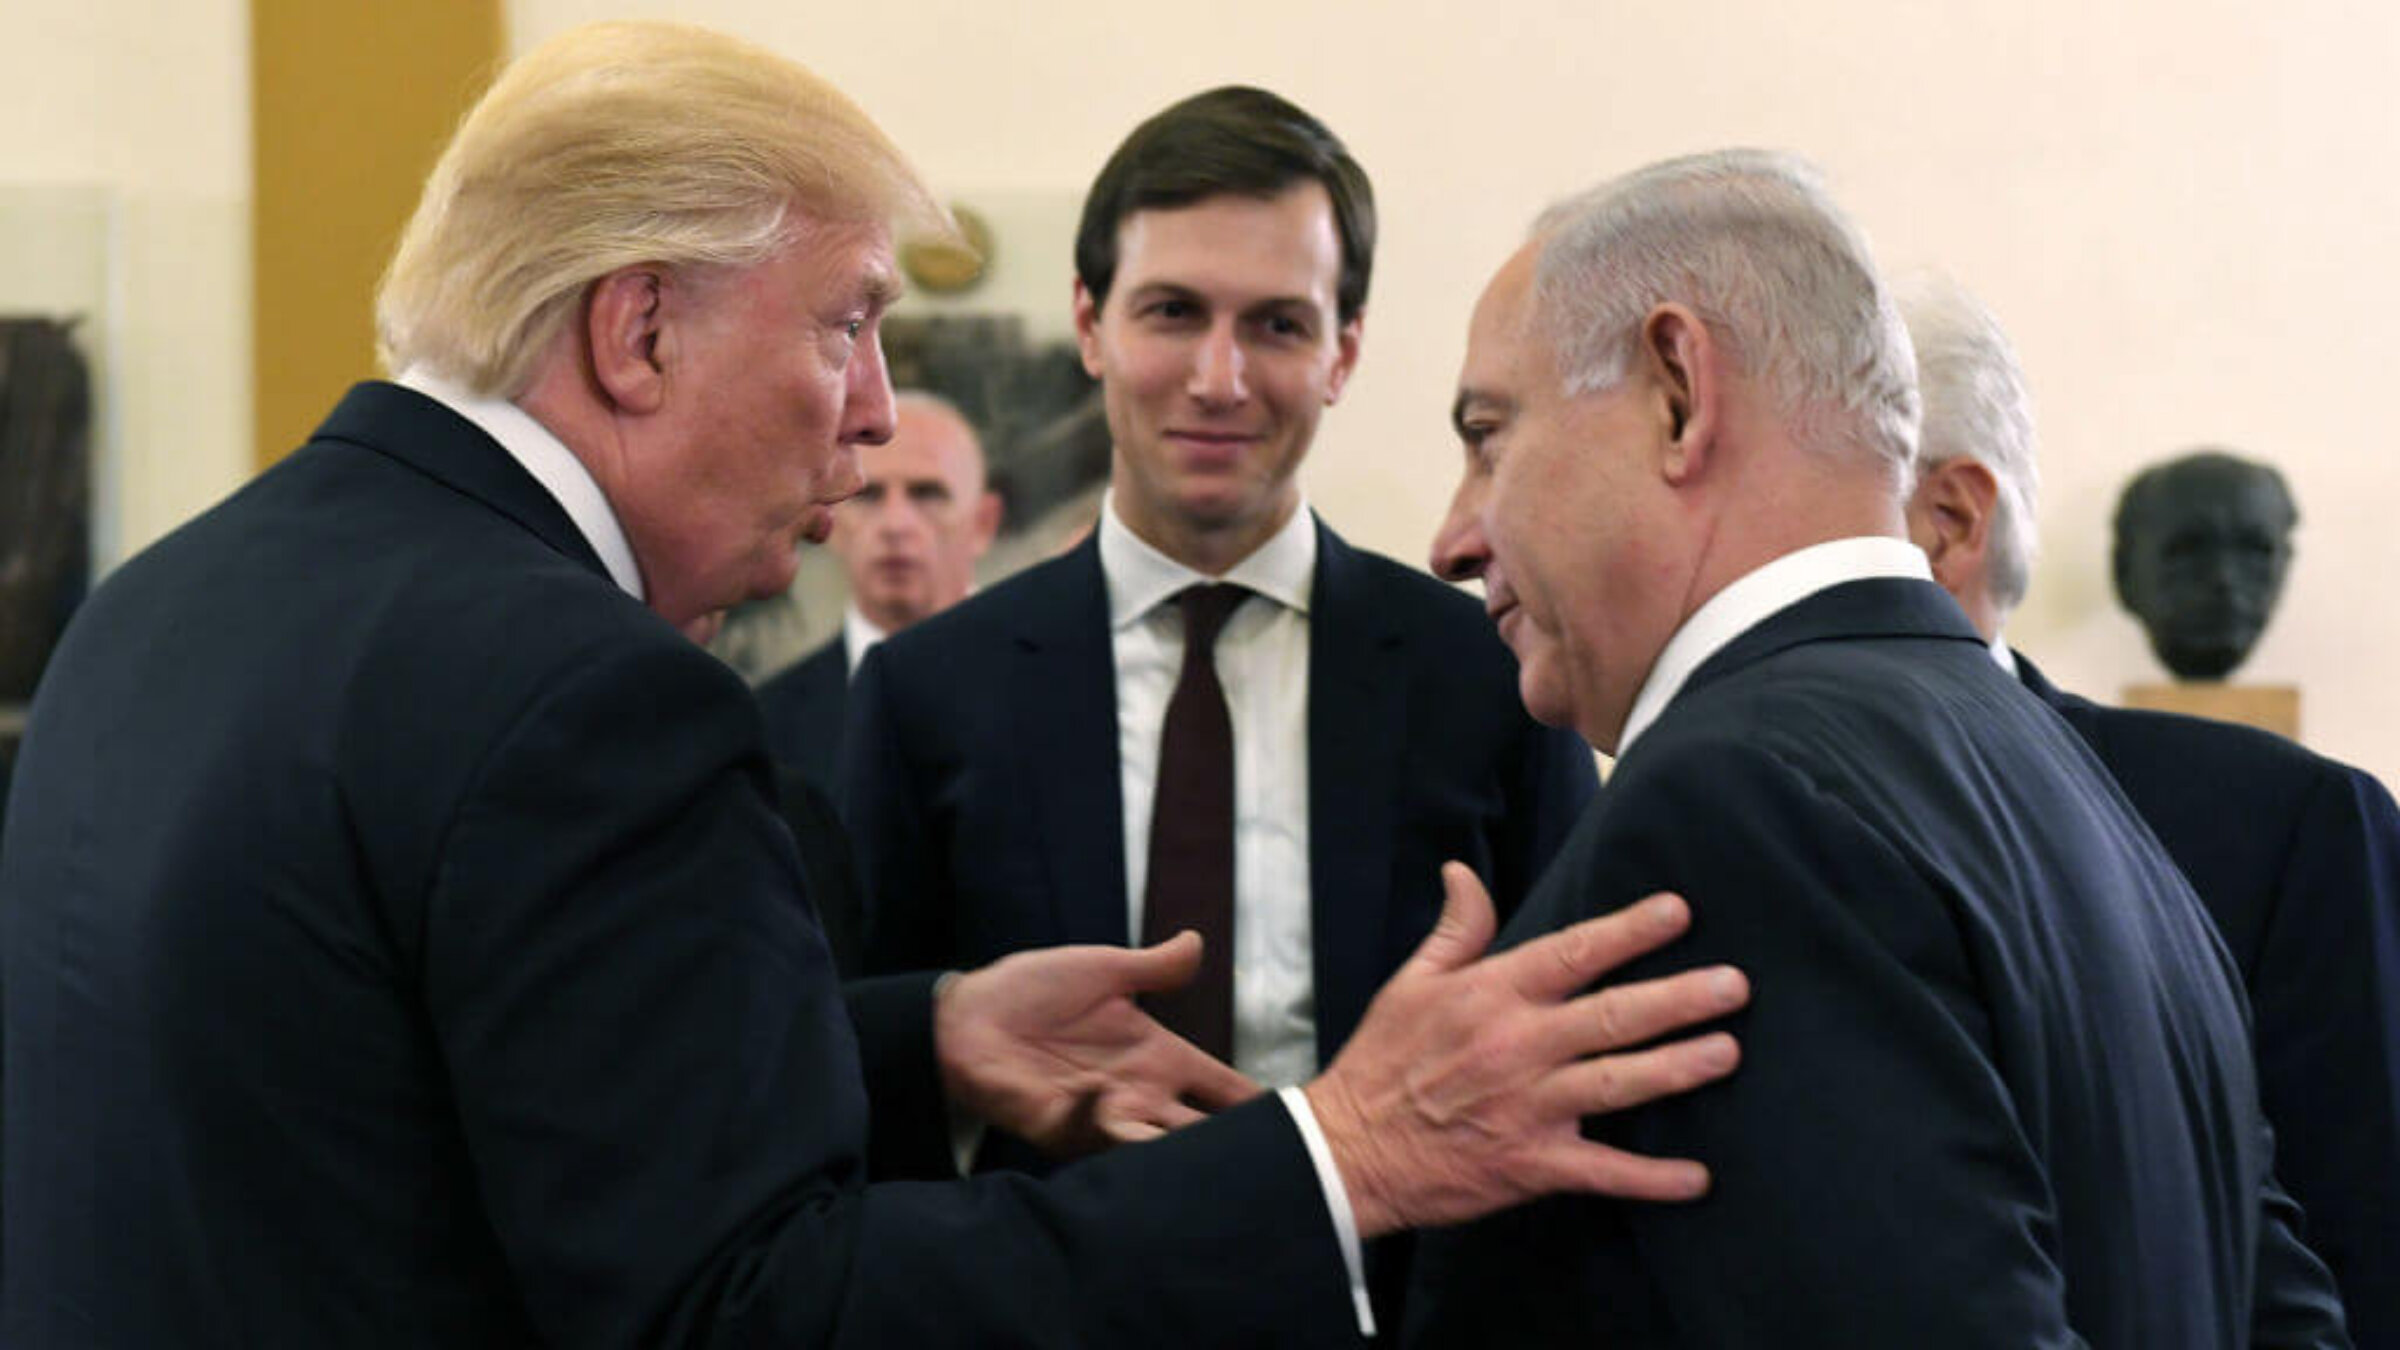 In this handout photo provided by the Israel Government Press Office (GPO), former US President Donald J Trump (L) and former White House senior adviser Jared Kushner met with Israel Prime Minister Benjamin Netanyahu (R) at the King David Hotel May 22, 2017 in Jerusalem, Israel. 